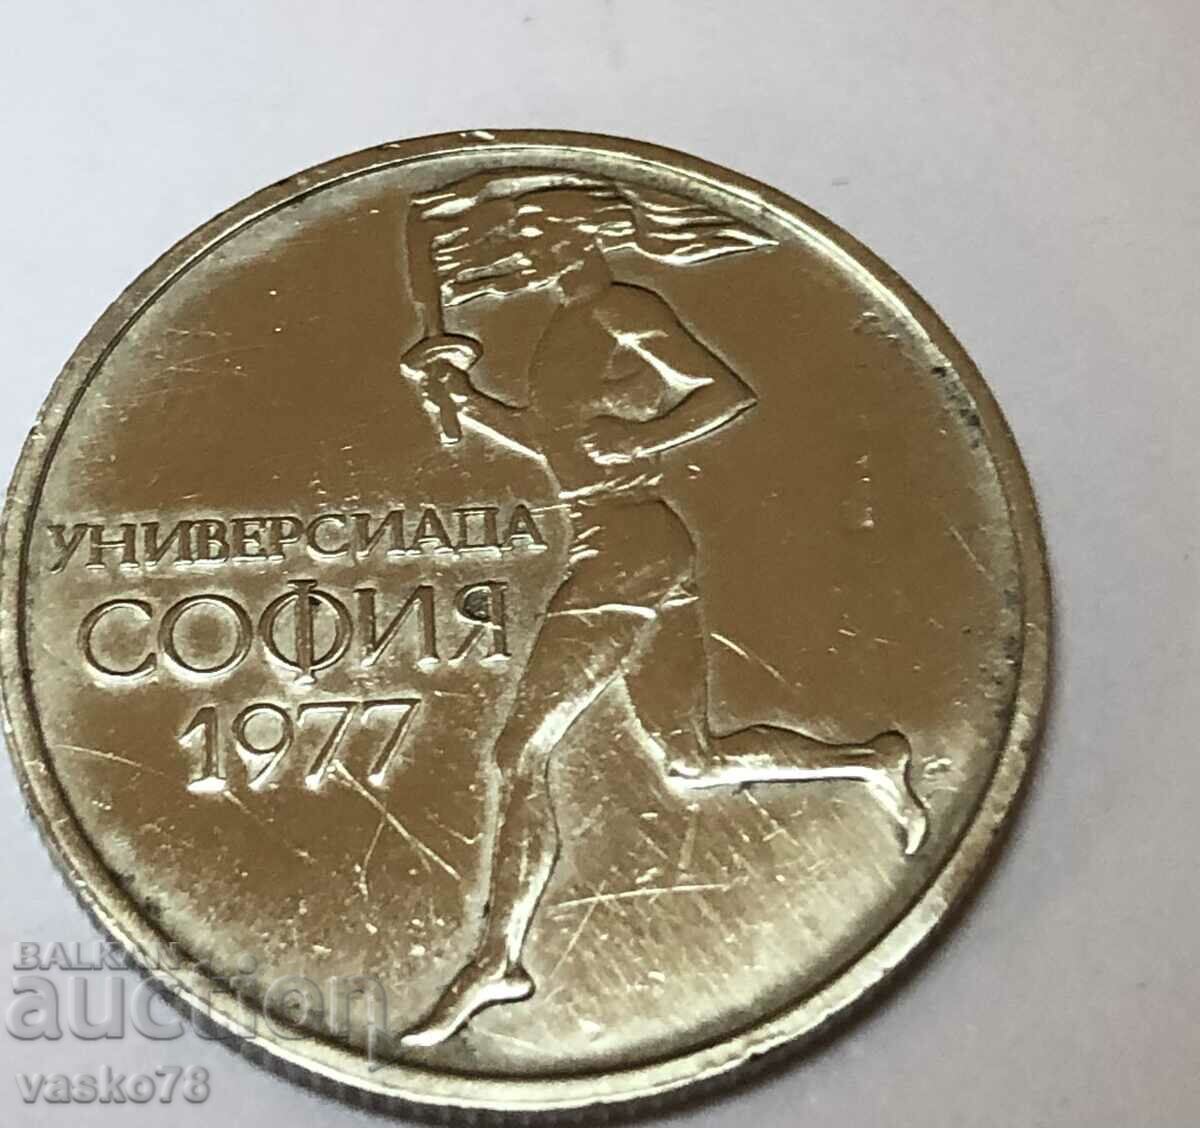 50 CENTS 1977